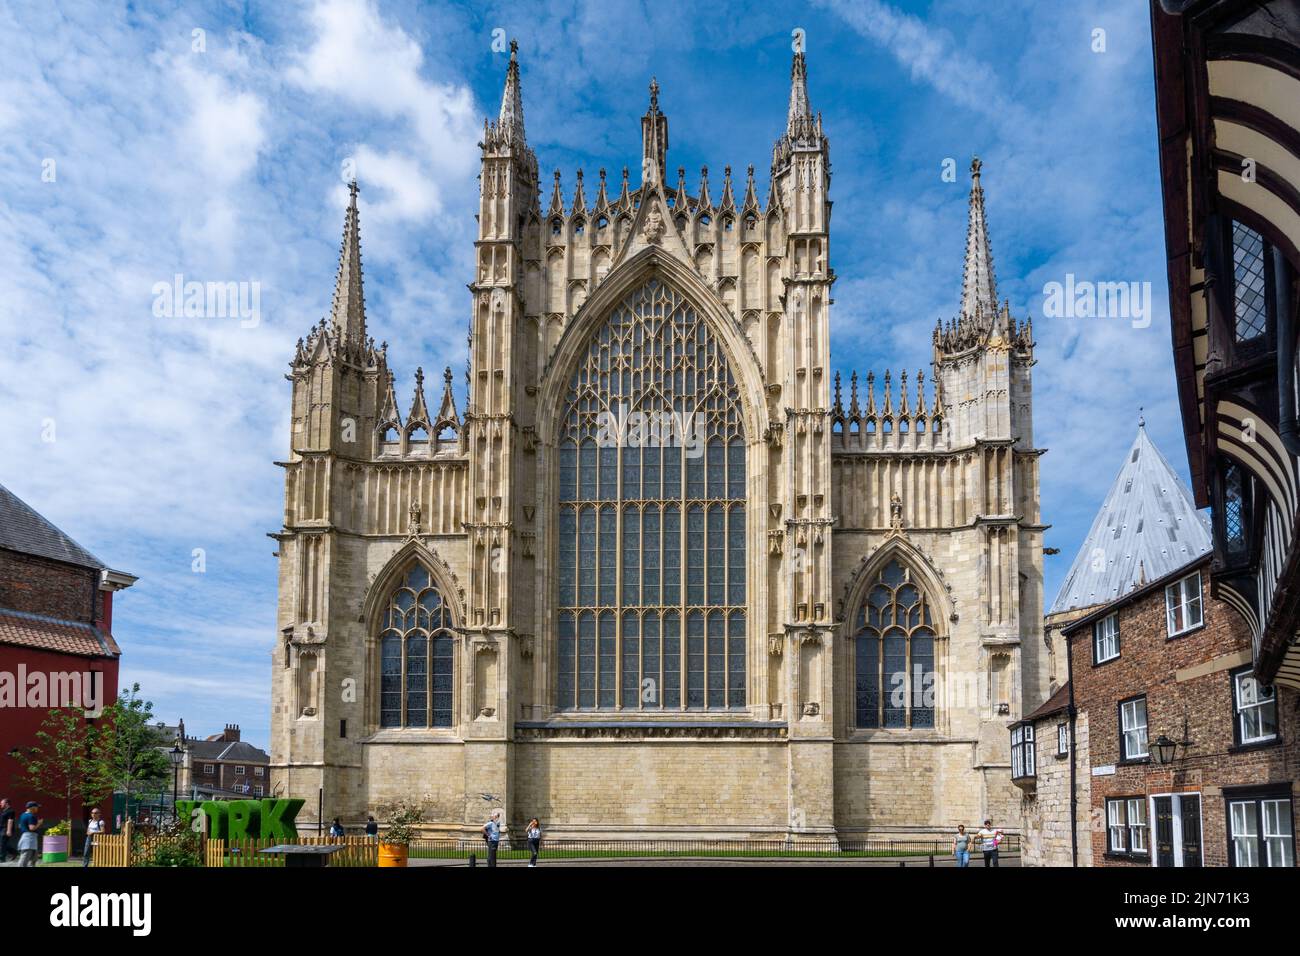 York, United Kingdom - 15 June, 2022: the 12th-century Gothic York Minster under a blue sky with small white clouds Stock Photo